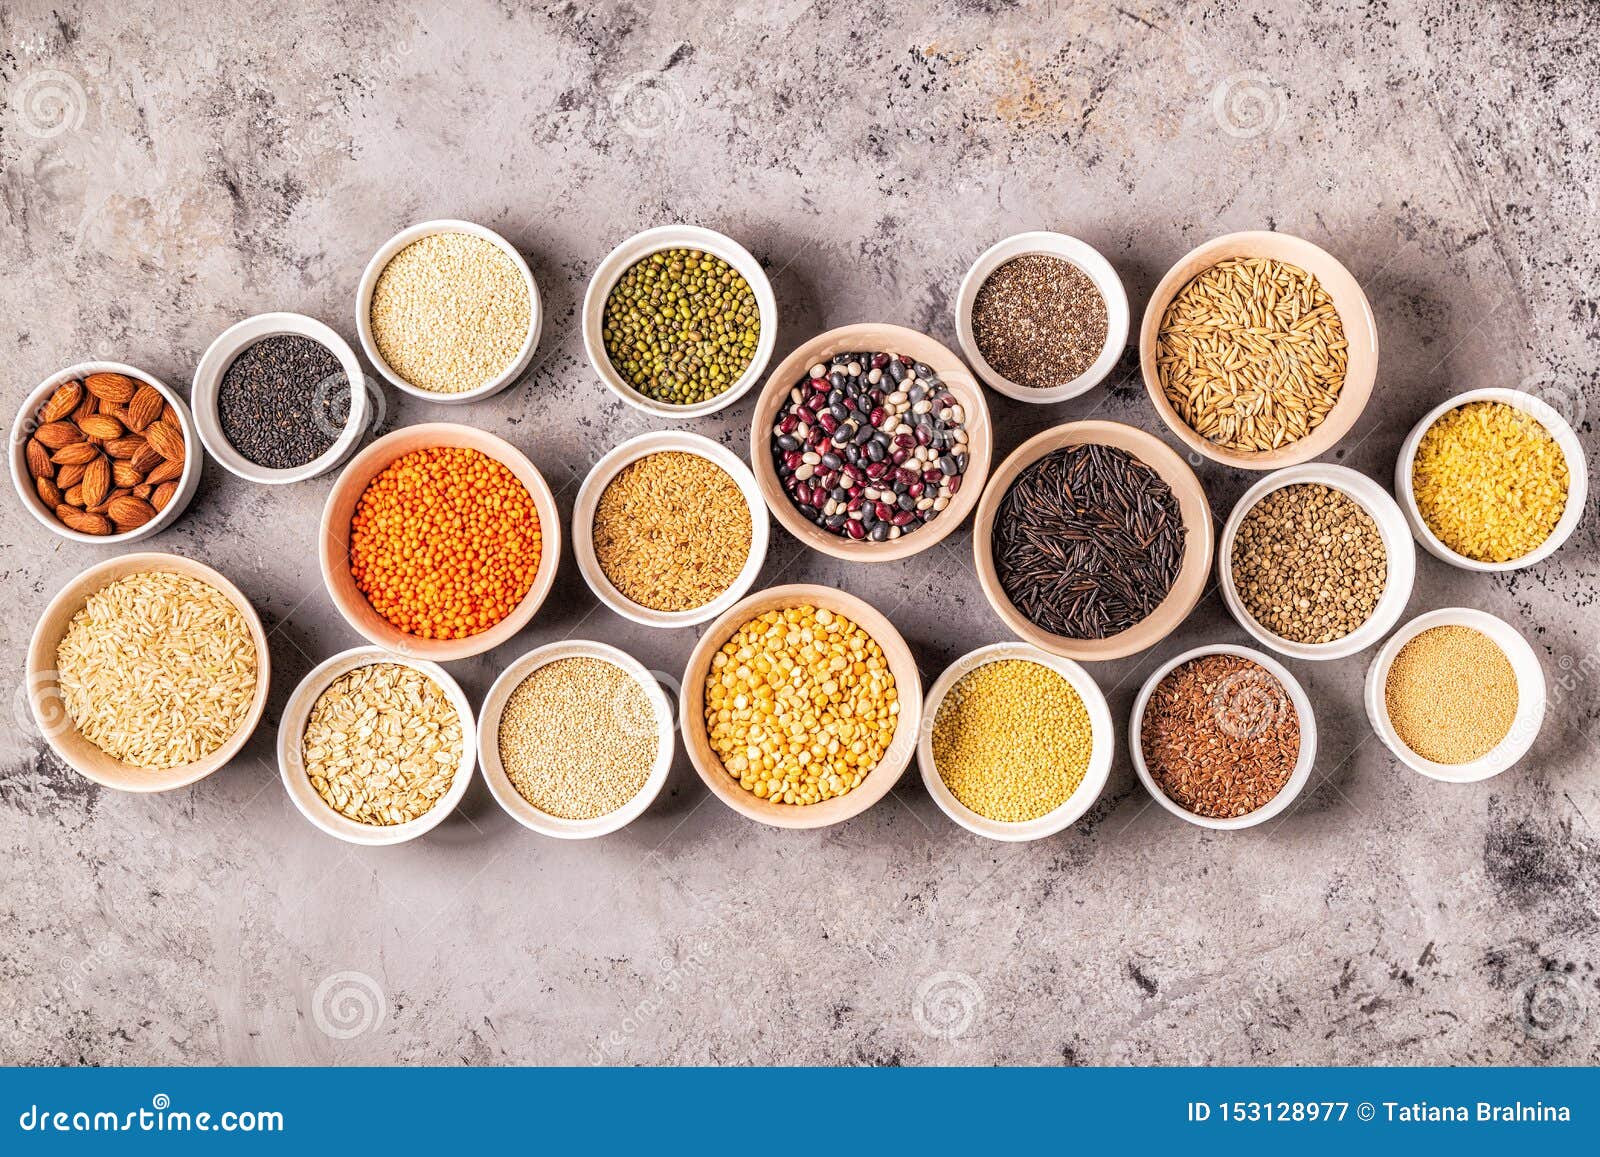 Set of Different Superfoods, Top View Stock Image - Image of mung ...